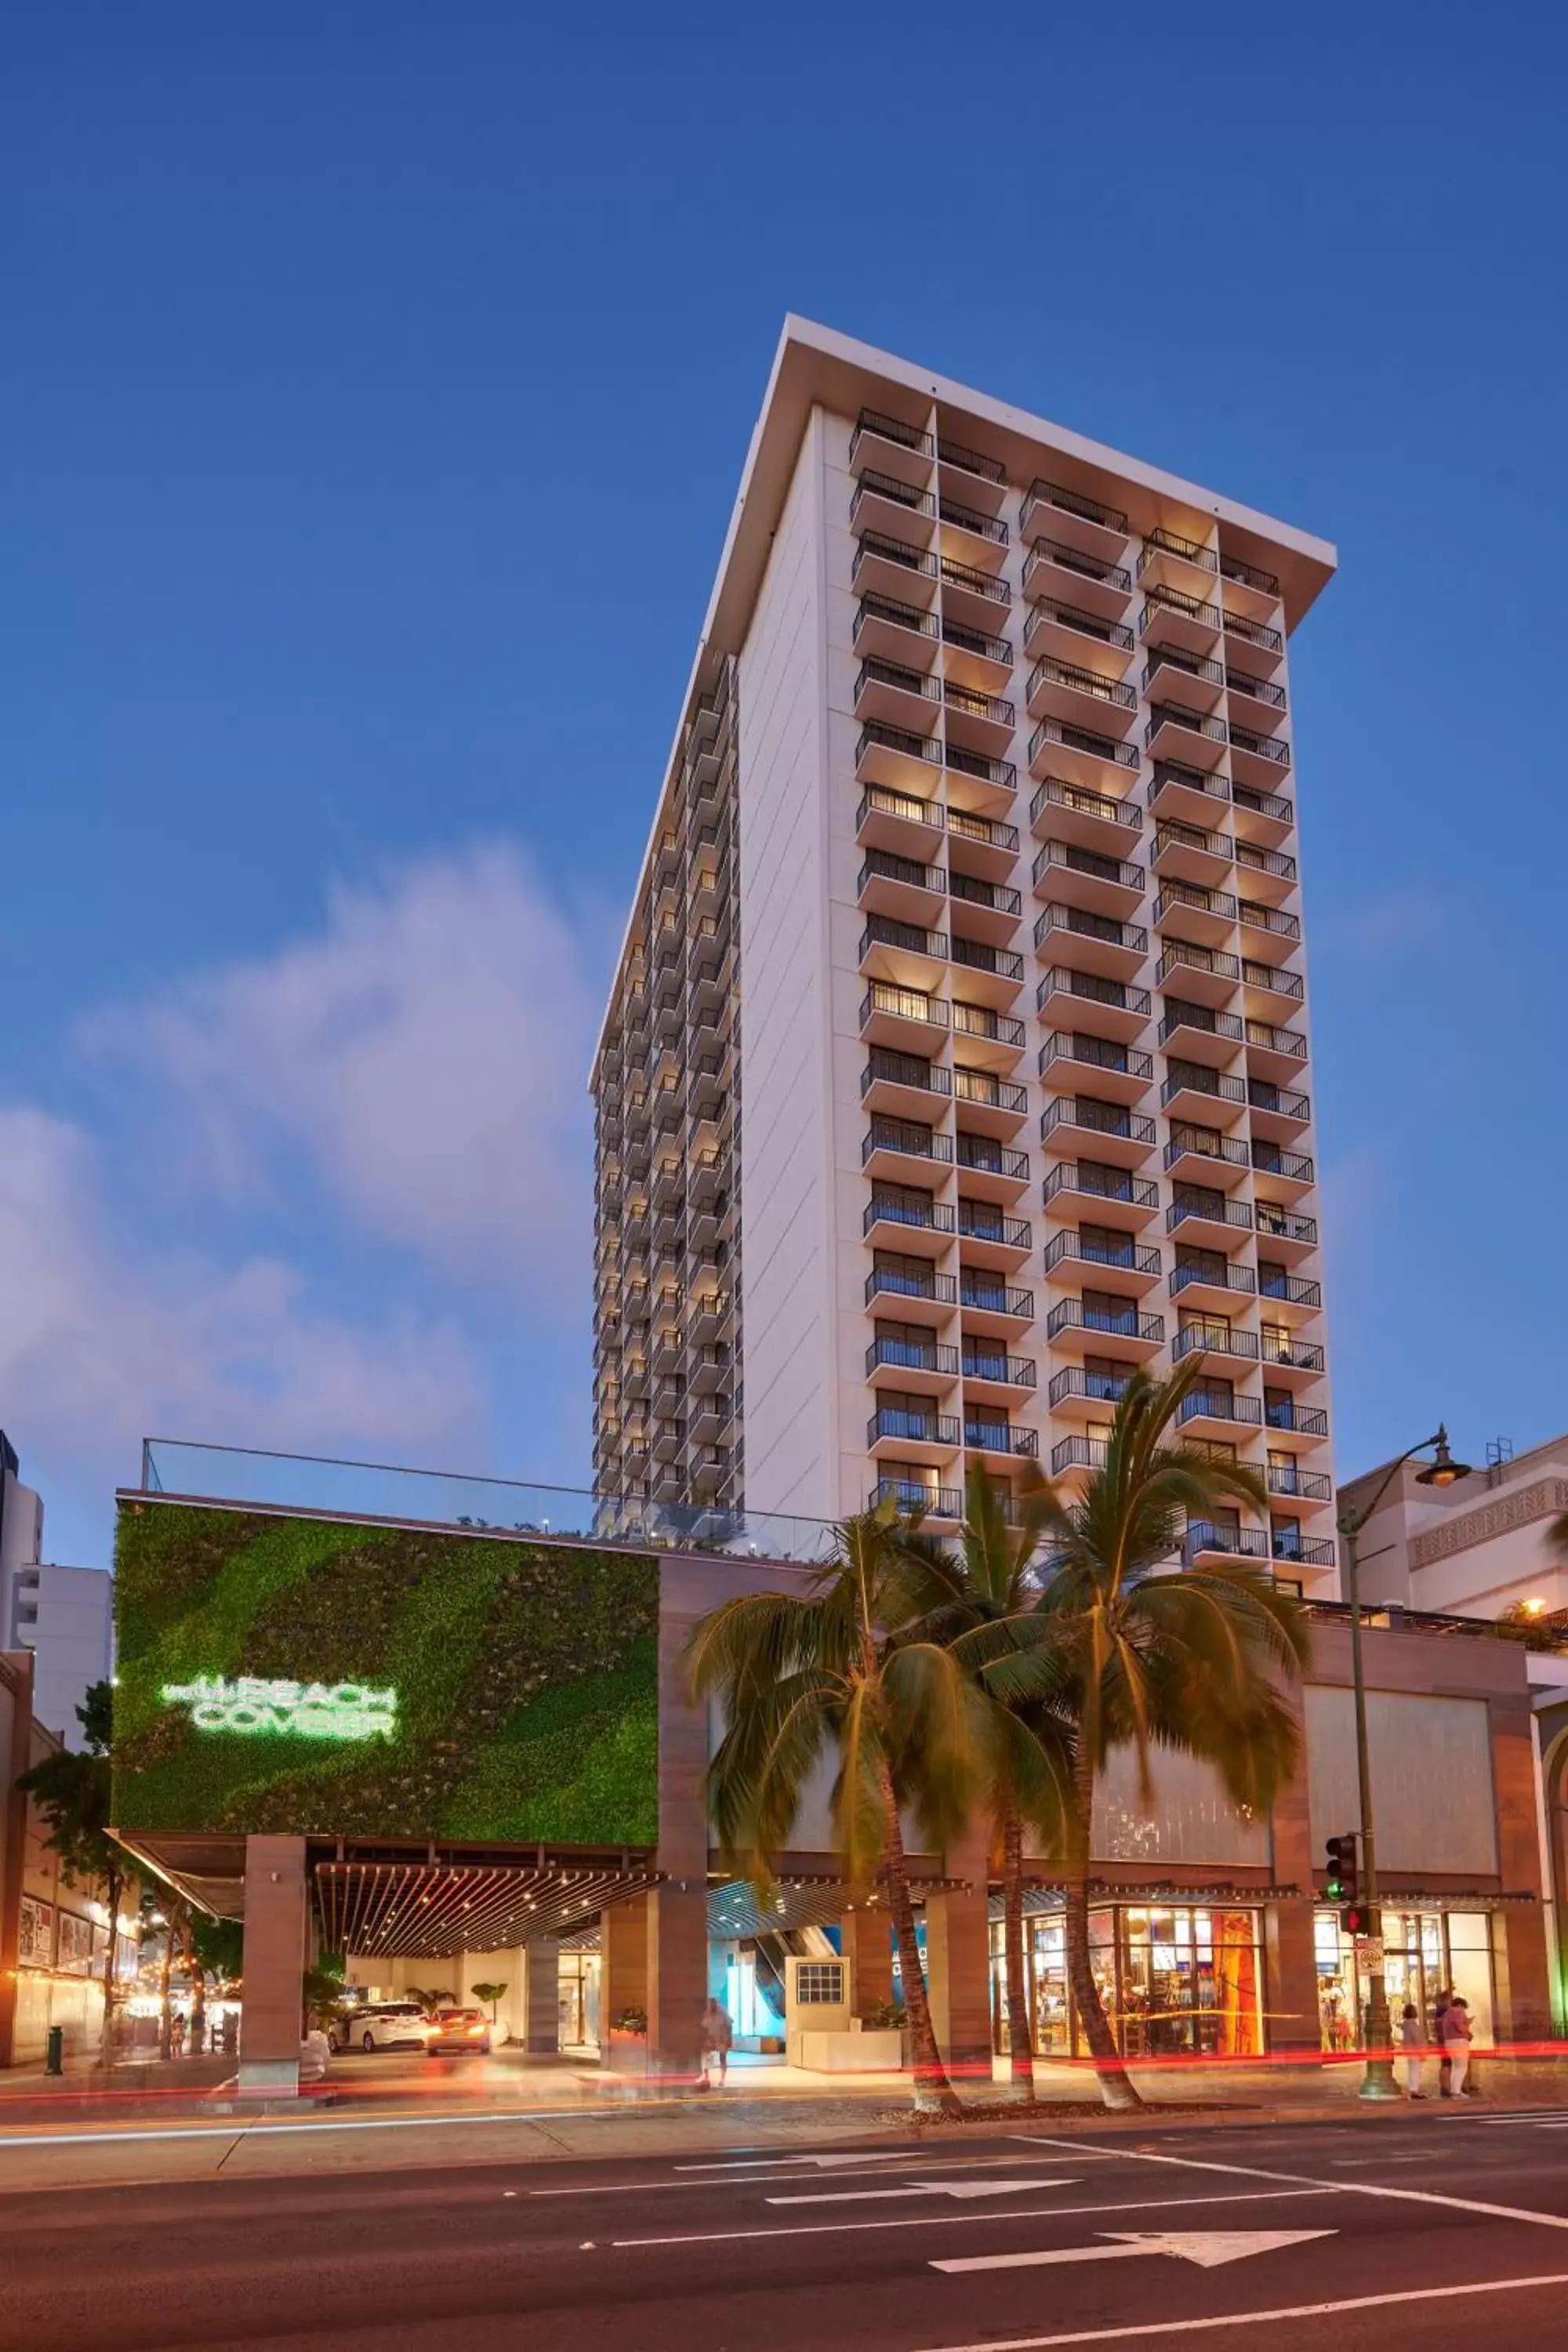 Property Building in OUTRIGGER Waikiki Beachcomber Hotel